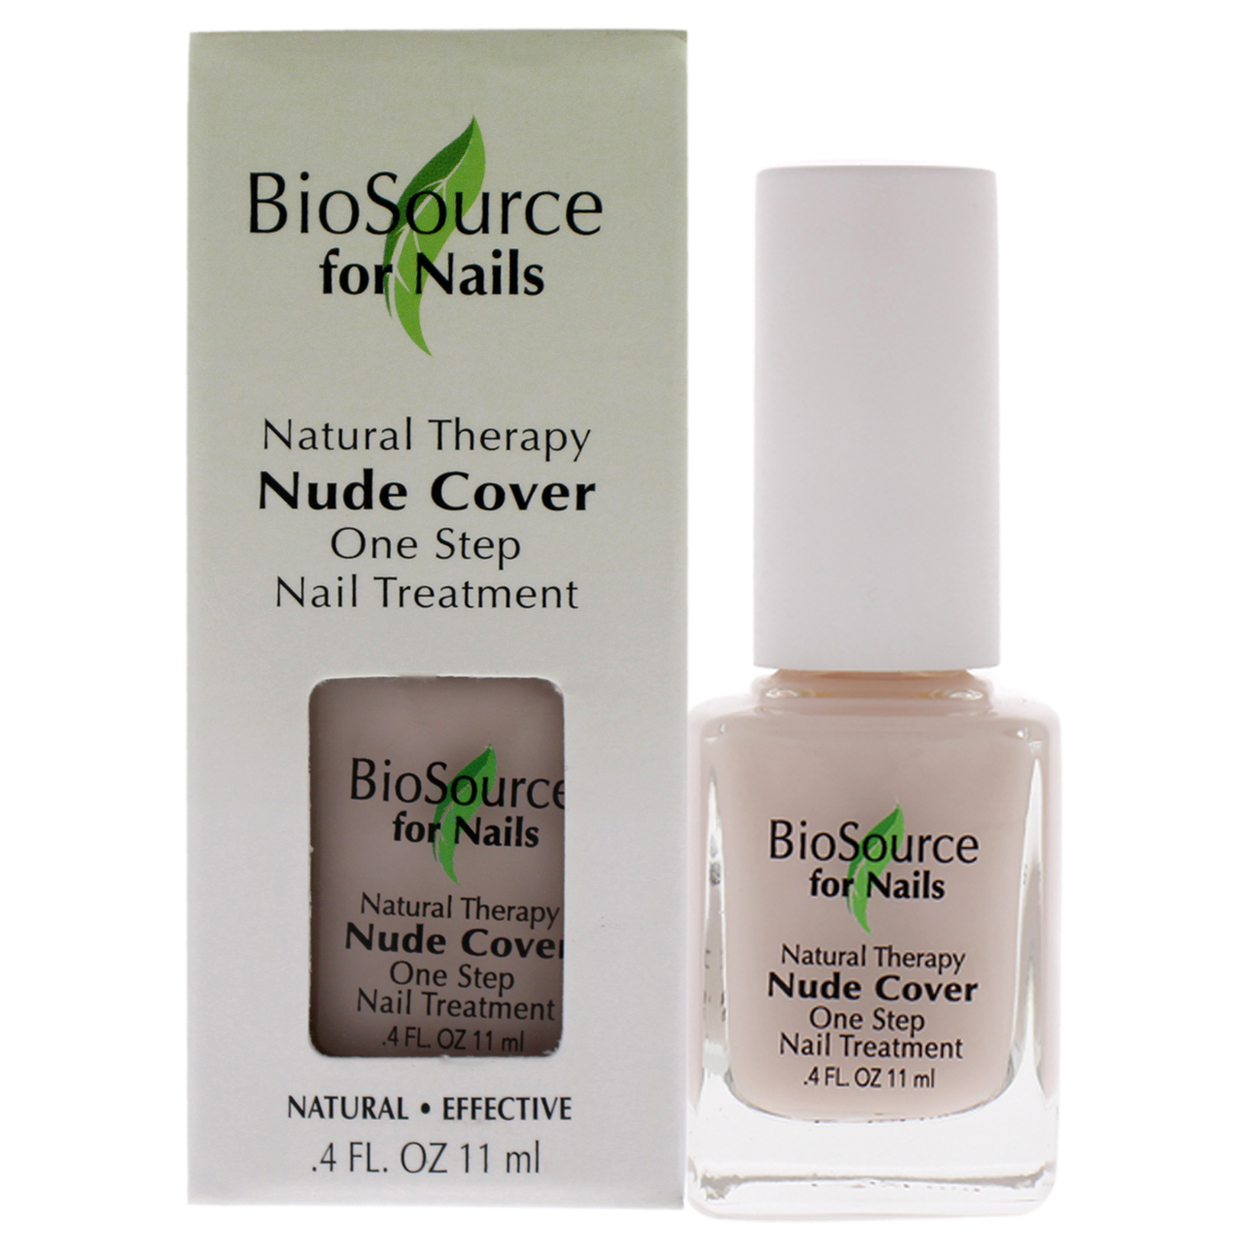 BioSource Natural Therapy Nude Cover Nail Treatment 0.4 Oz